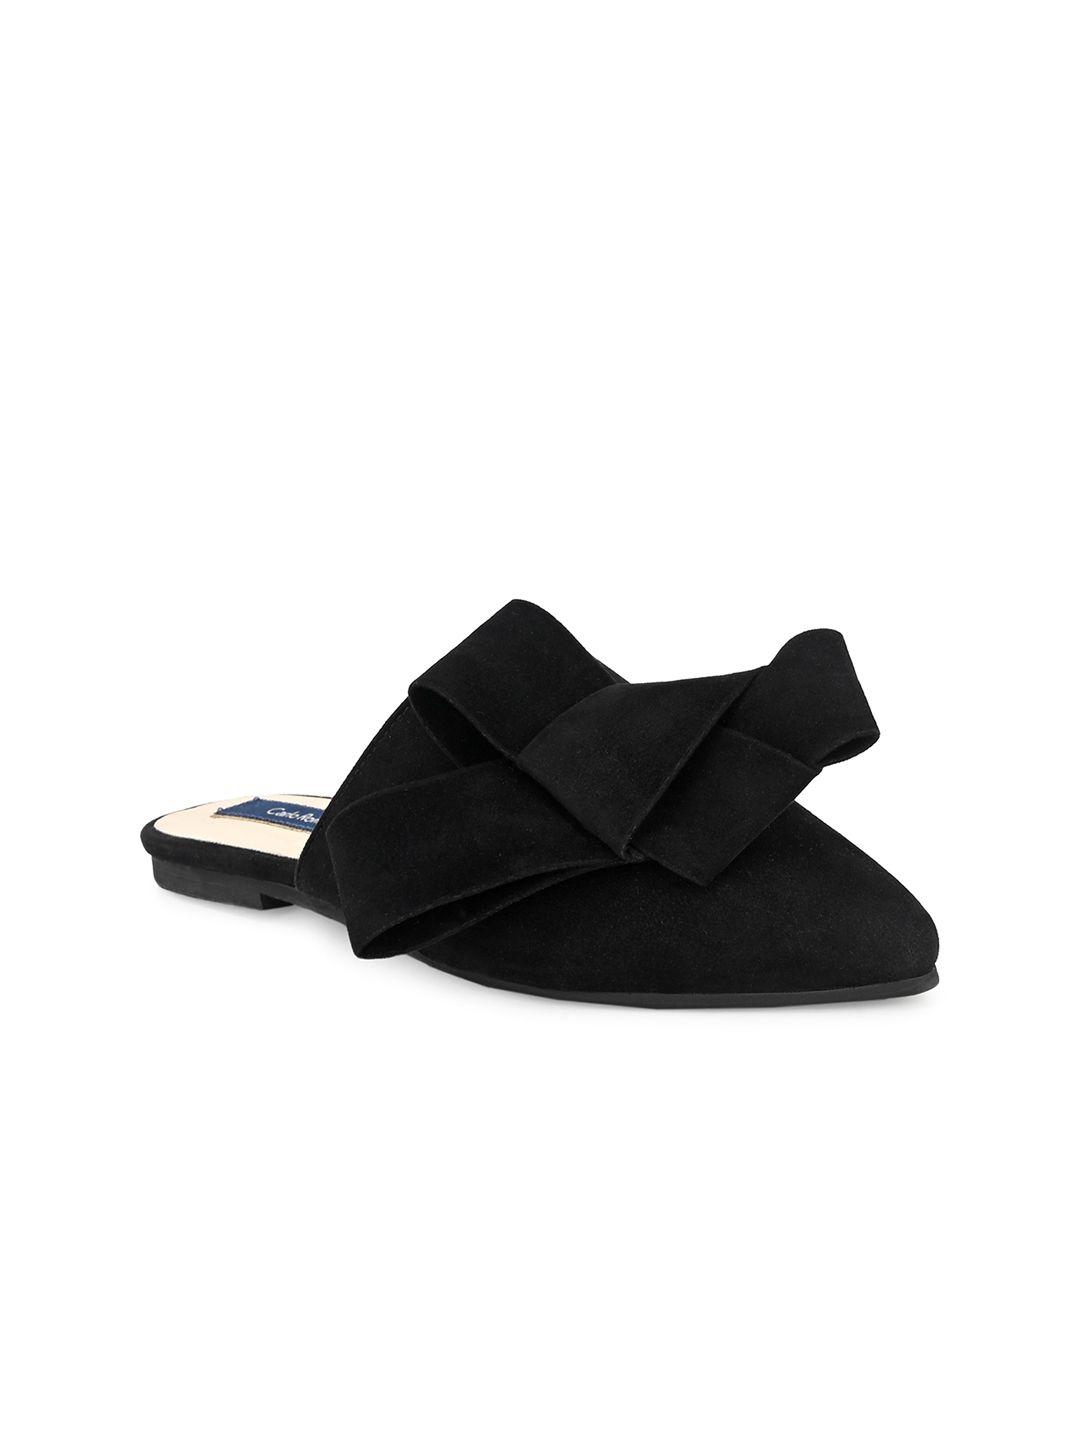 carlo-romano-women-mules-with-bows-flats